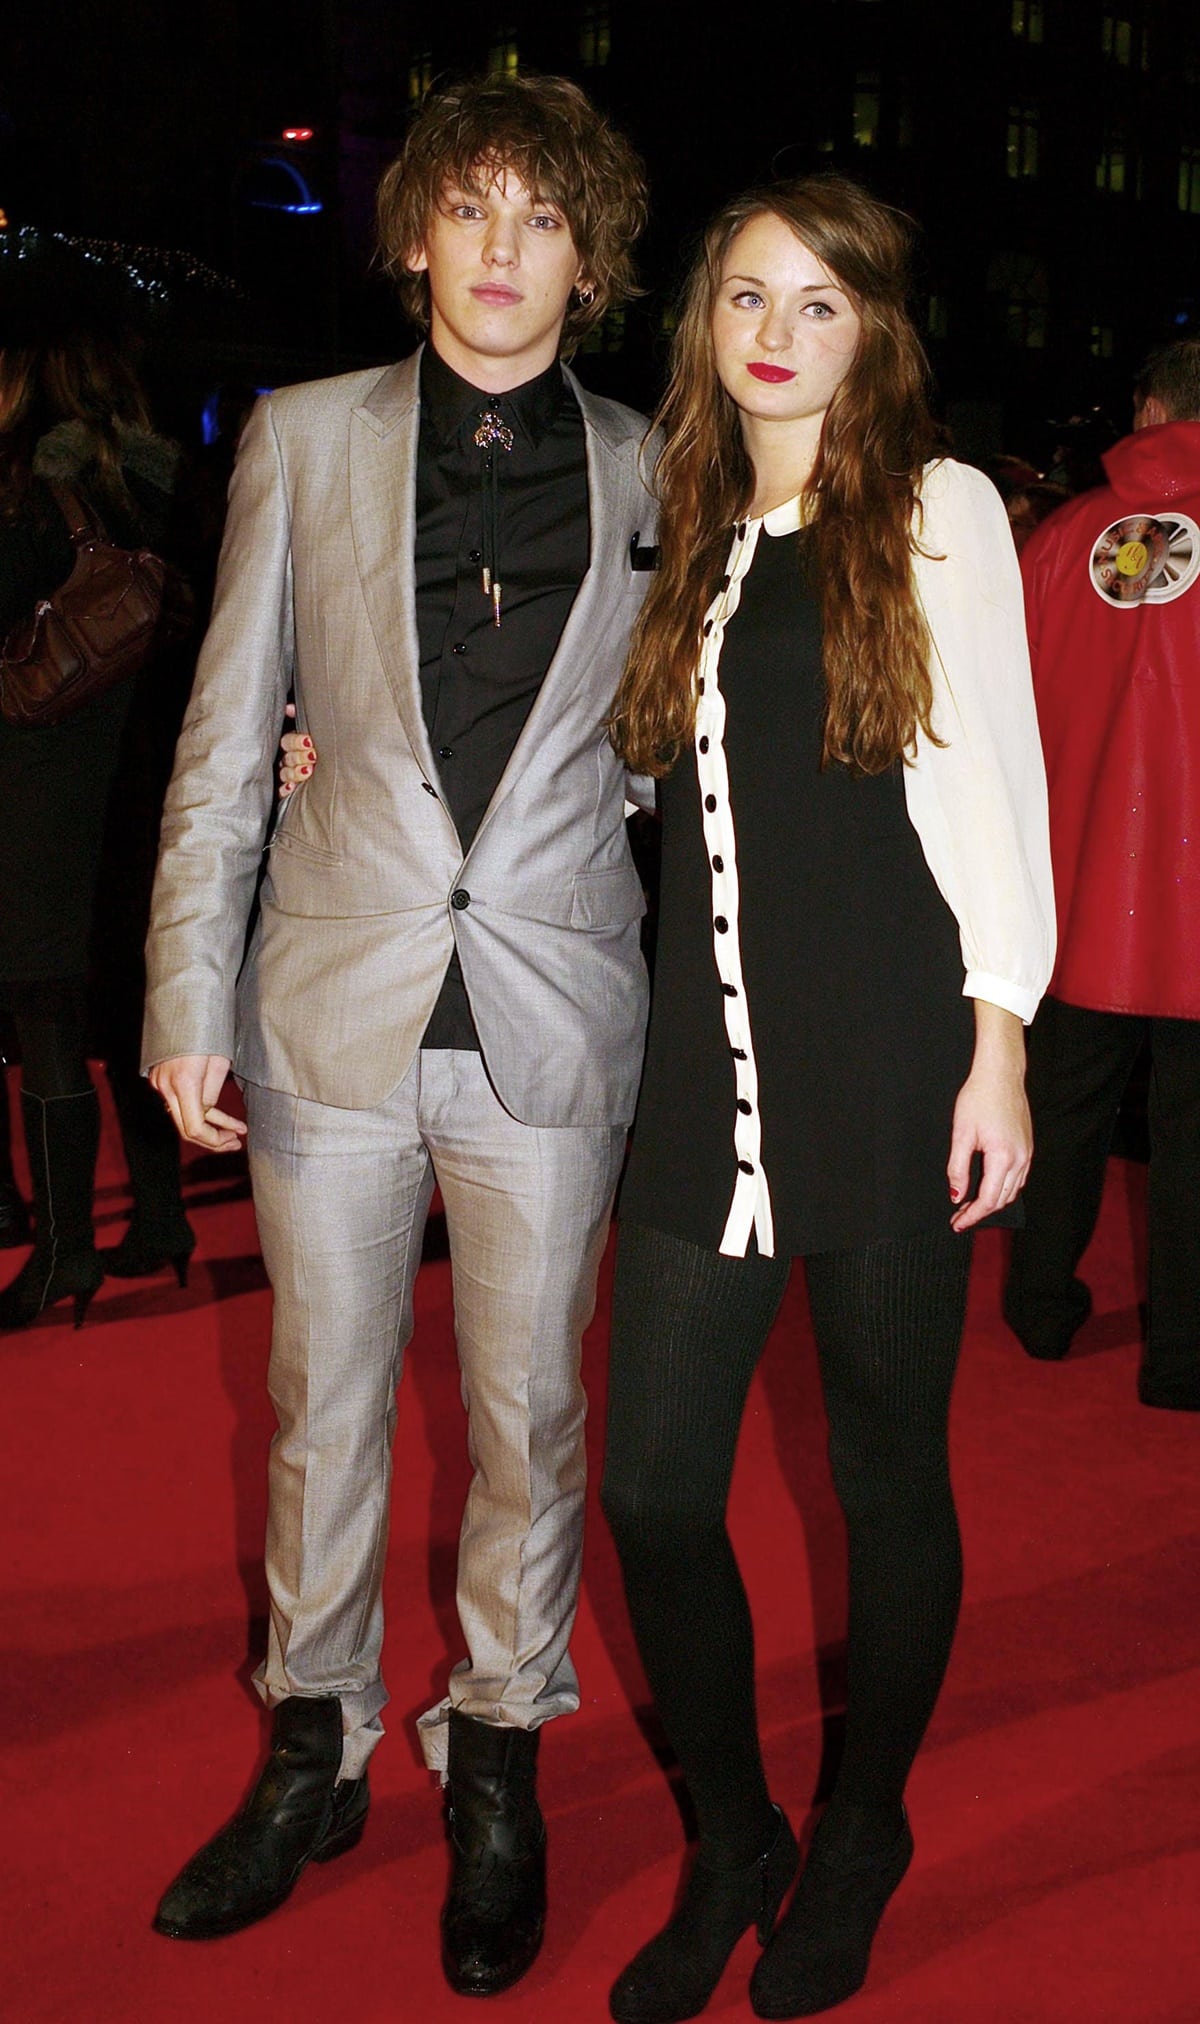 Jamie Campbell Bower and fashion designer Zoe Graham dated from 2007 to 2009